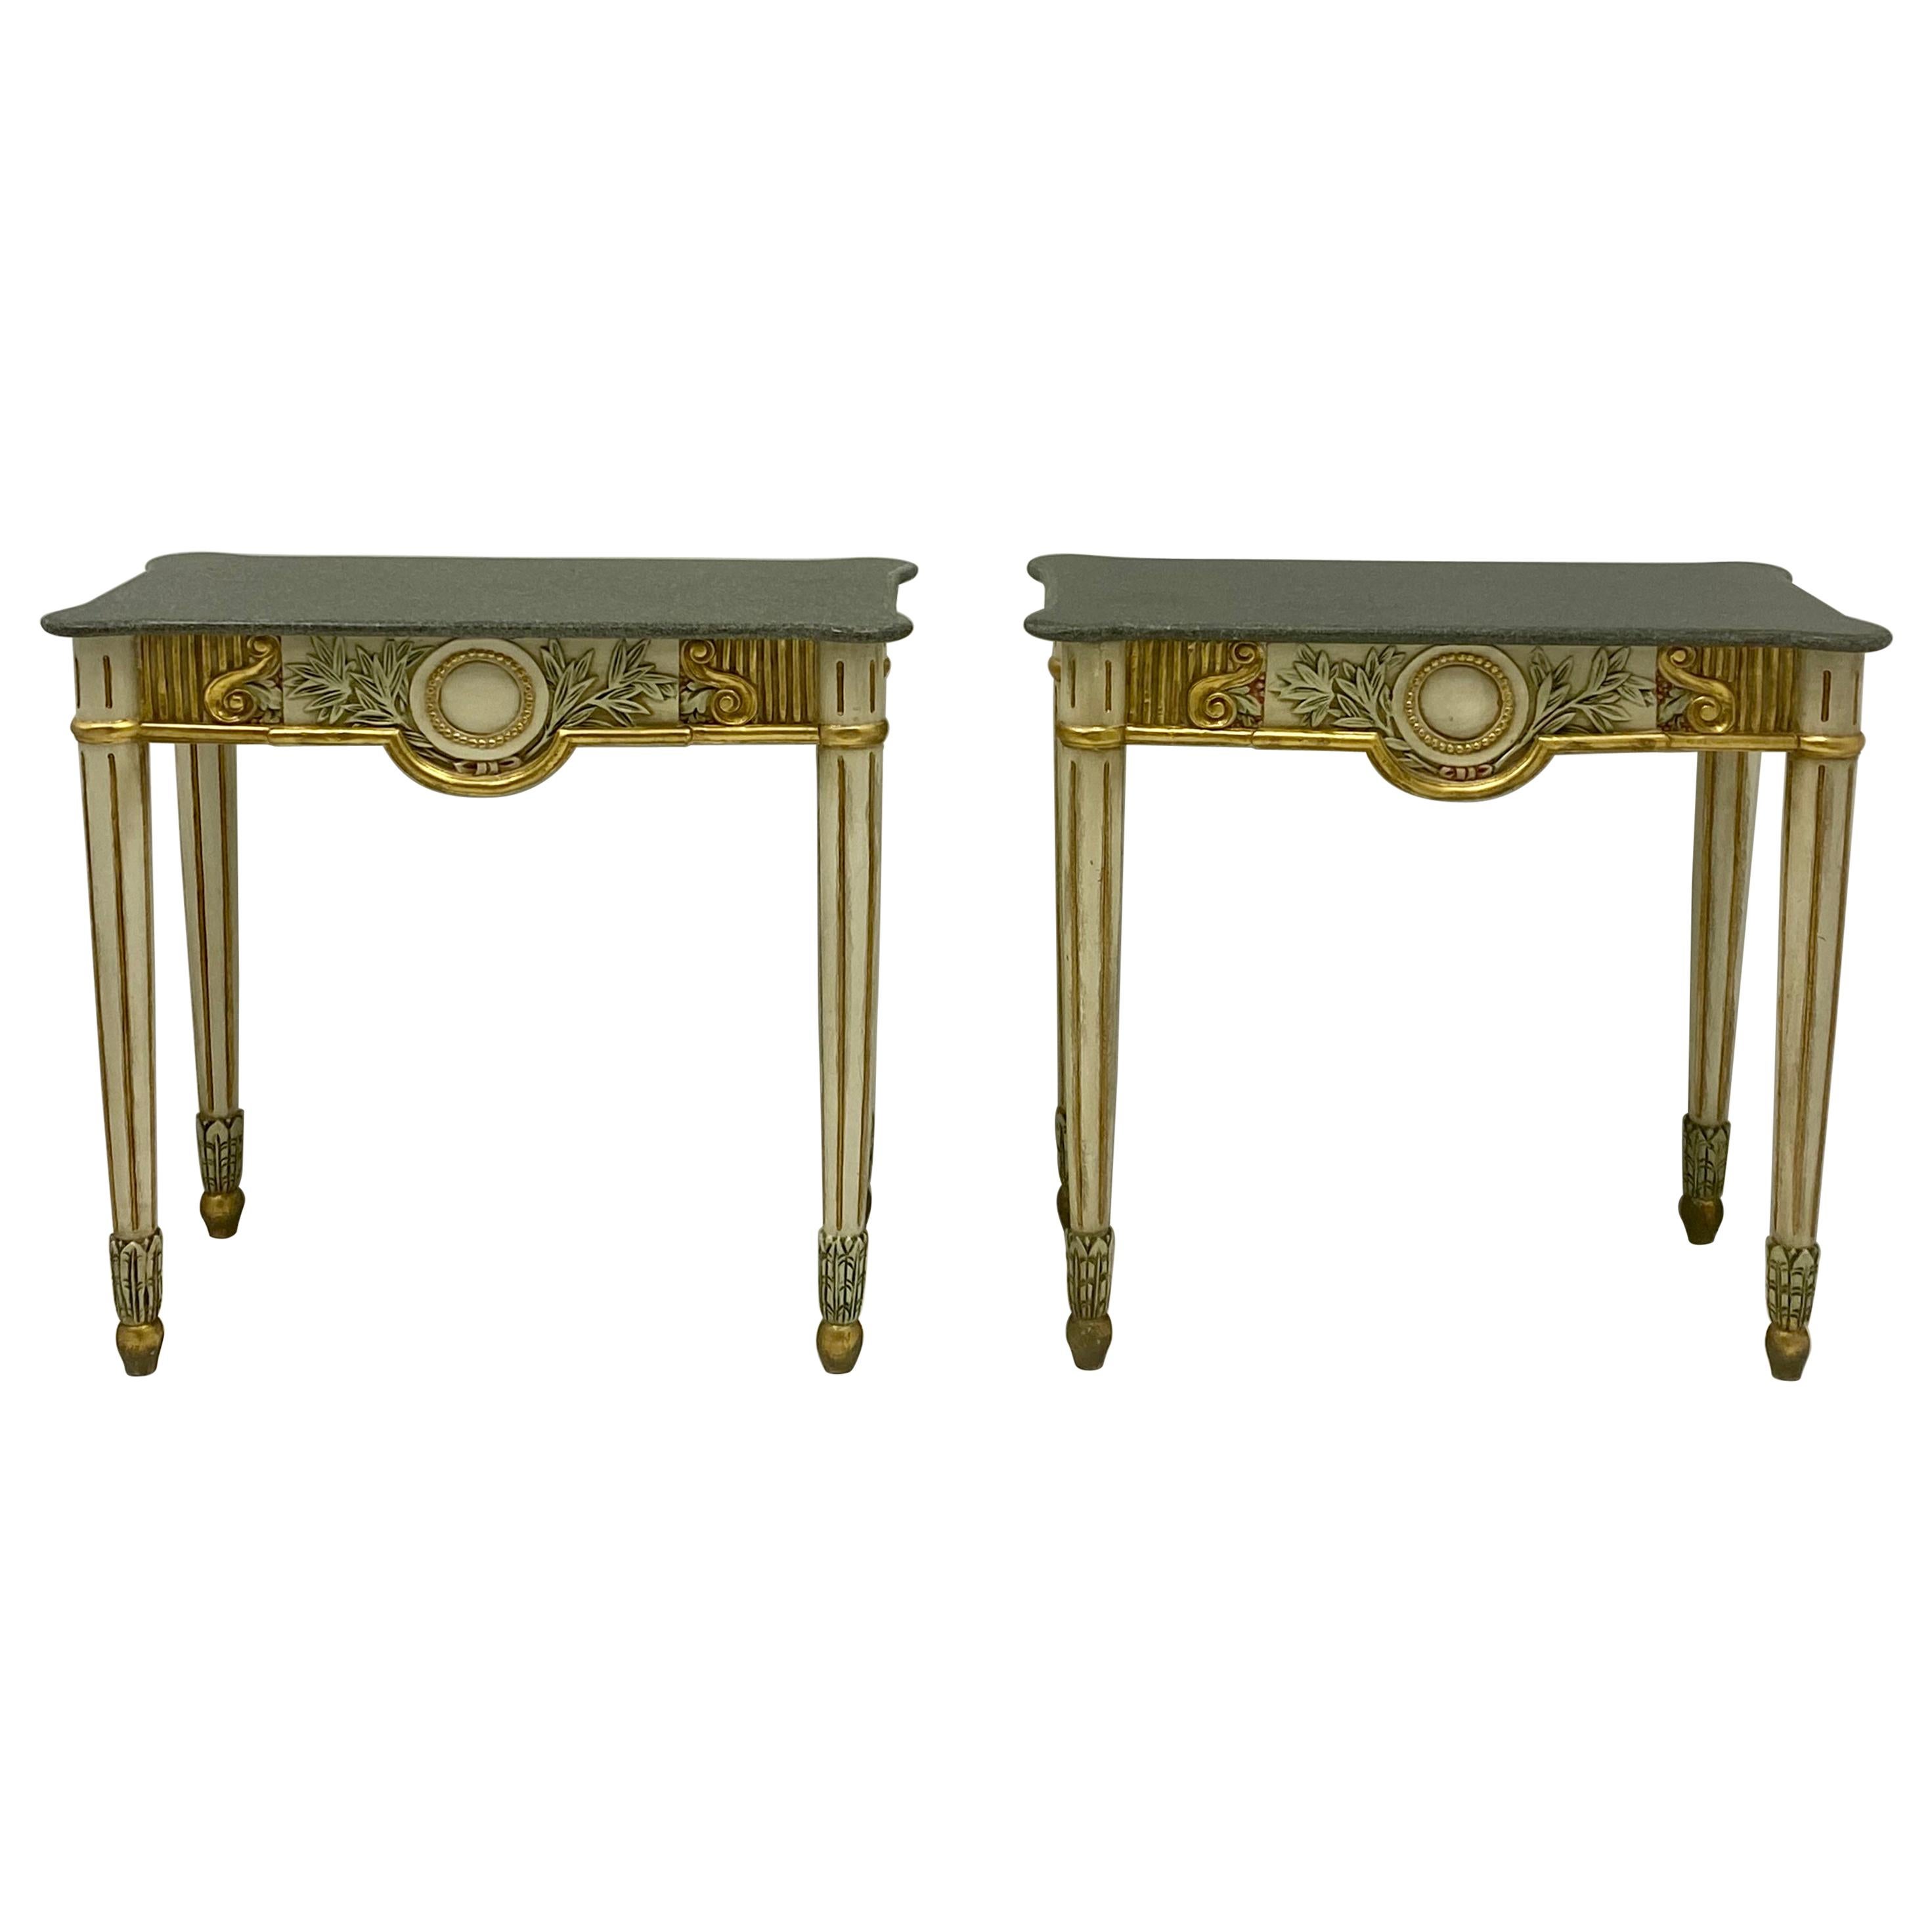 1970s Italian Painted Giltwood and Stone Console Tables, a Pair